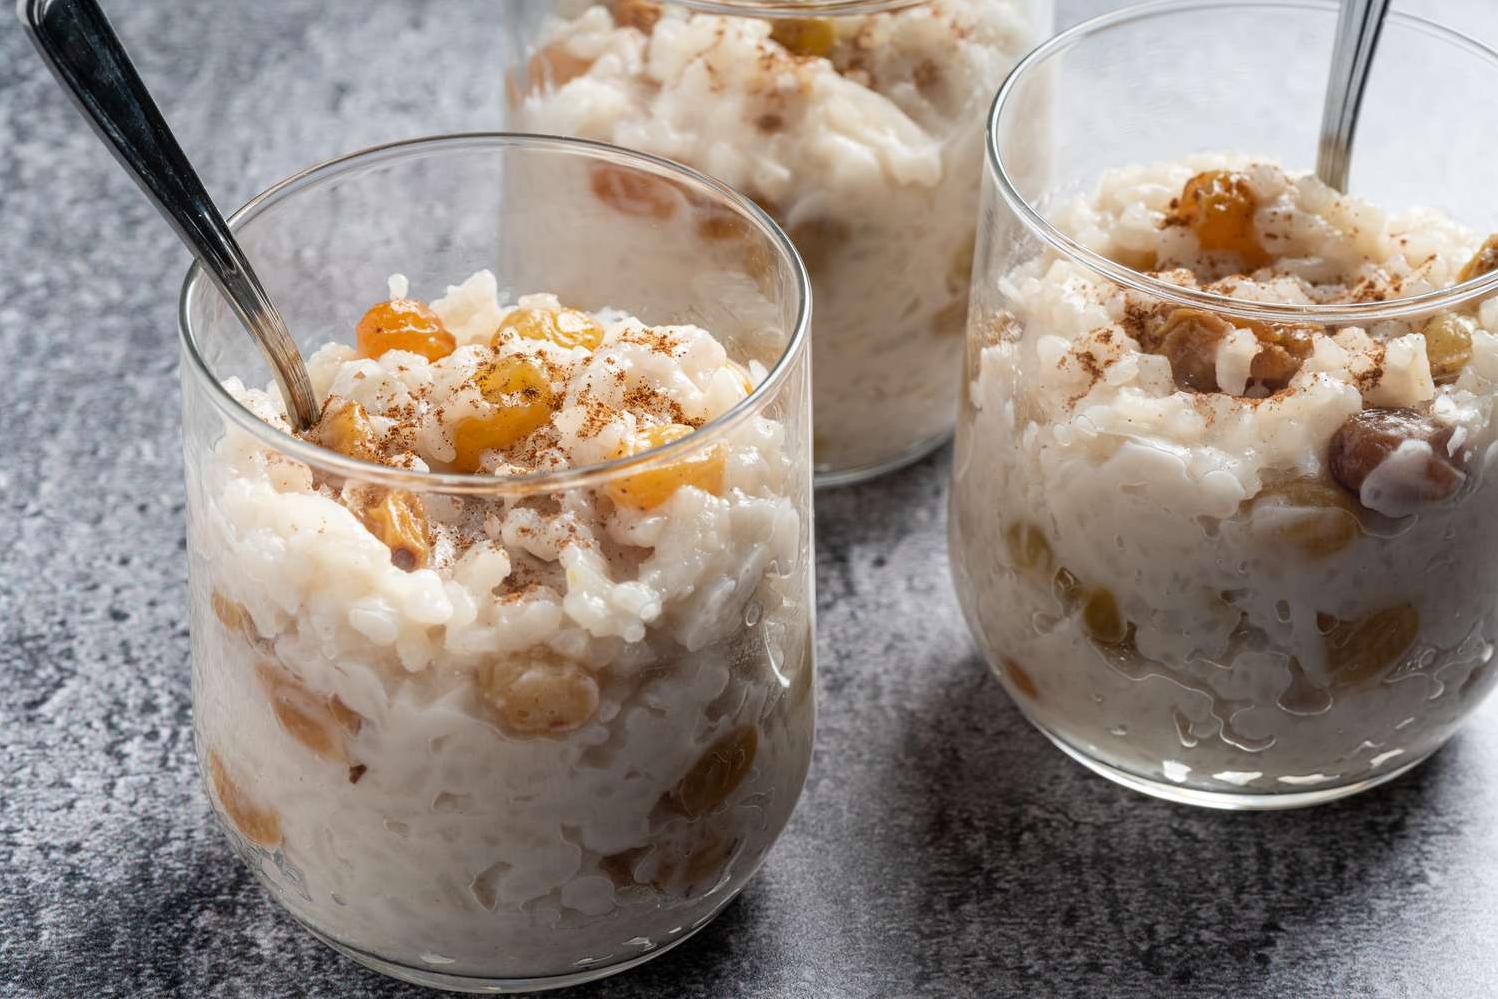  Creamy and sweet, this rice pudding is Puerto Rican comfort food at its finest.